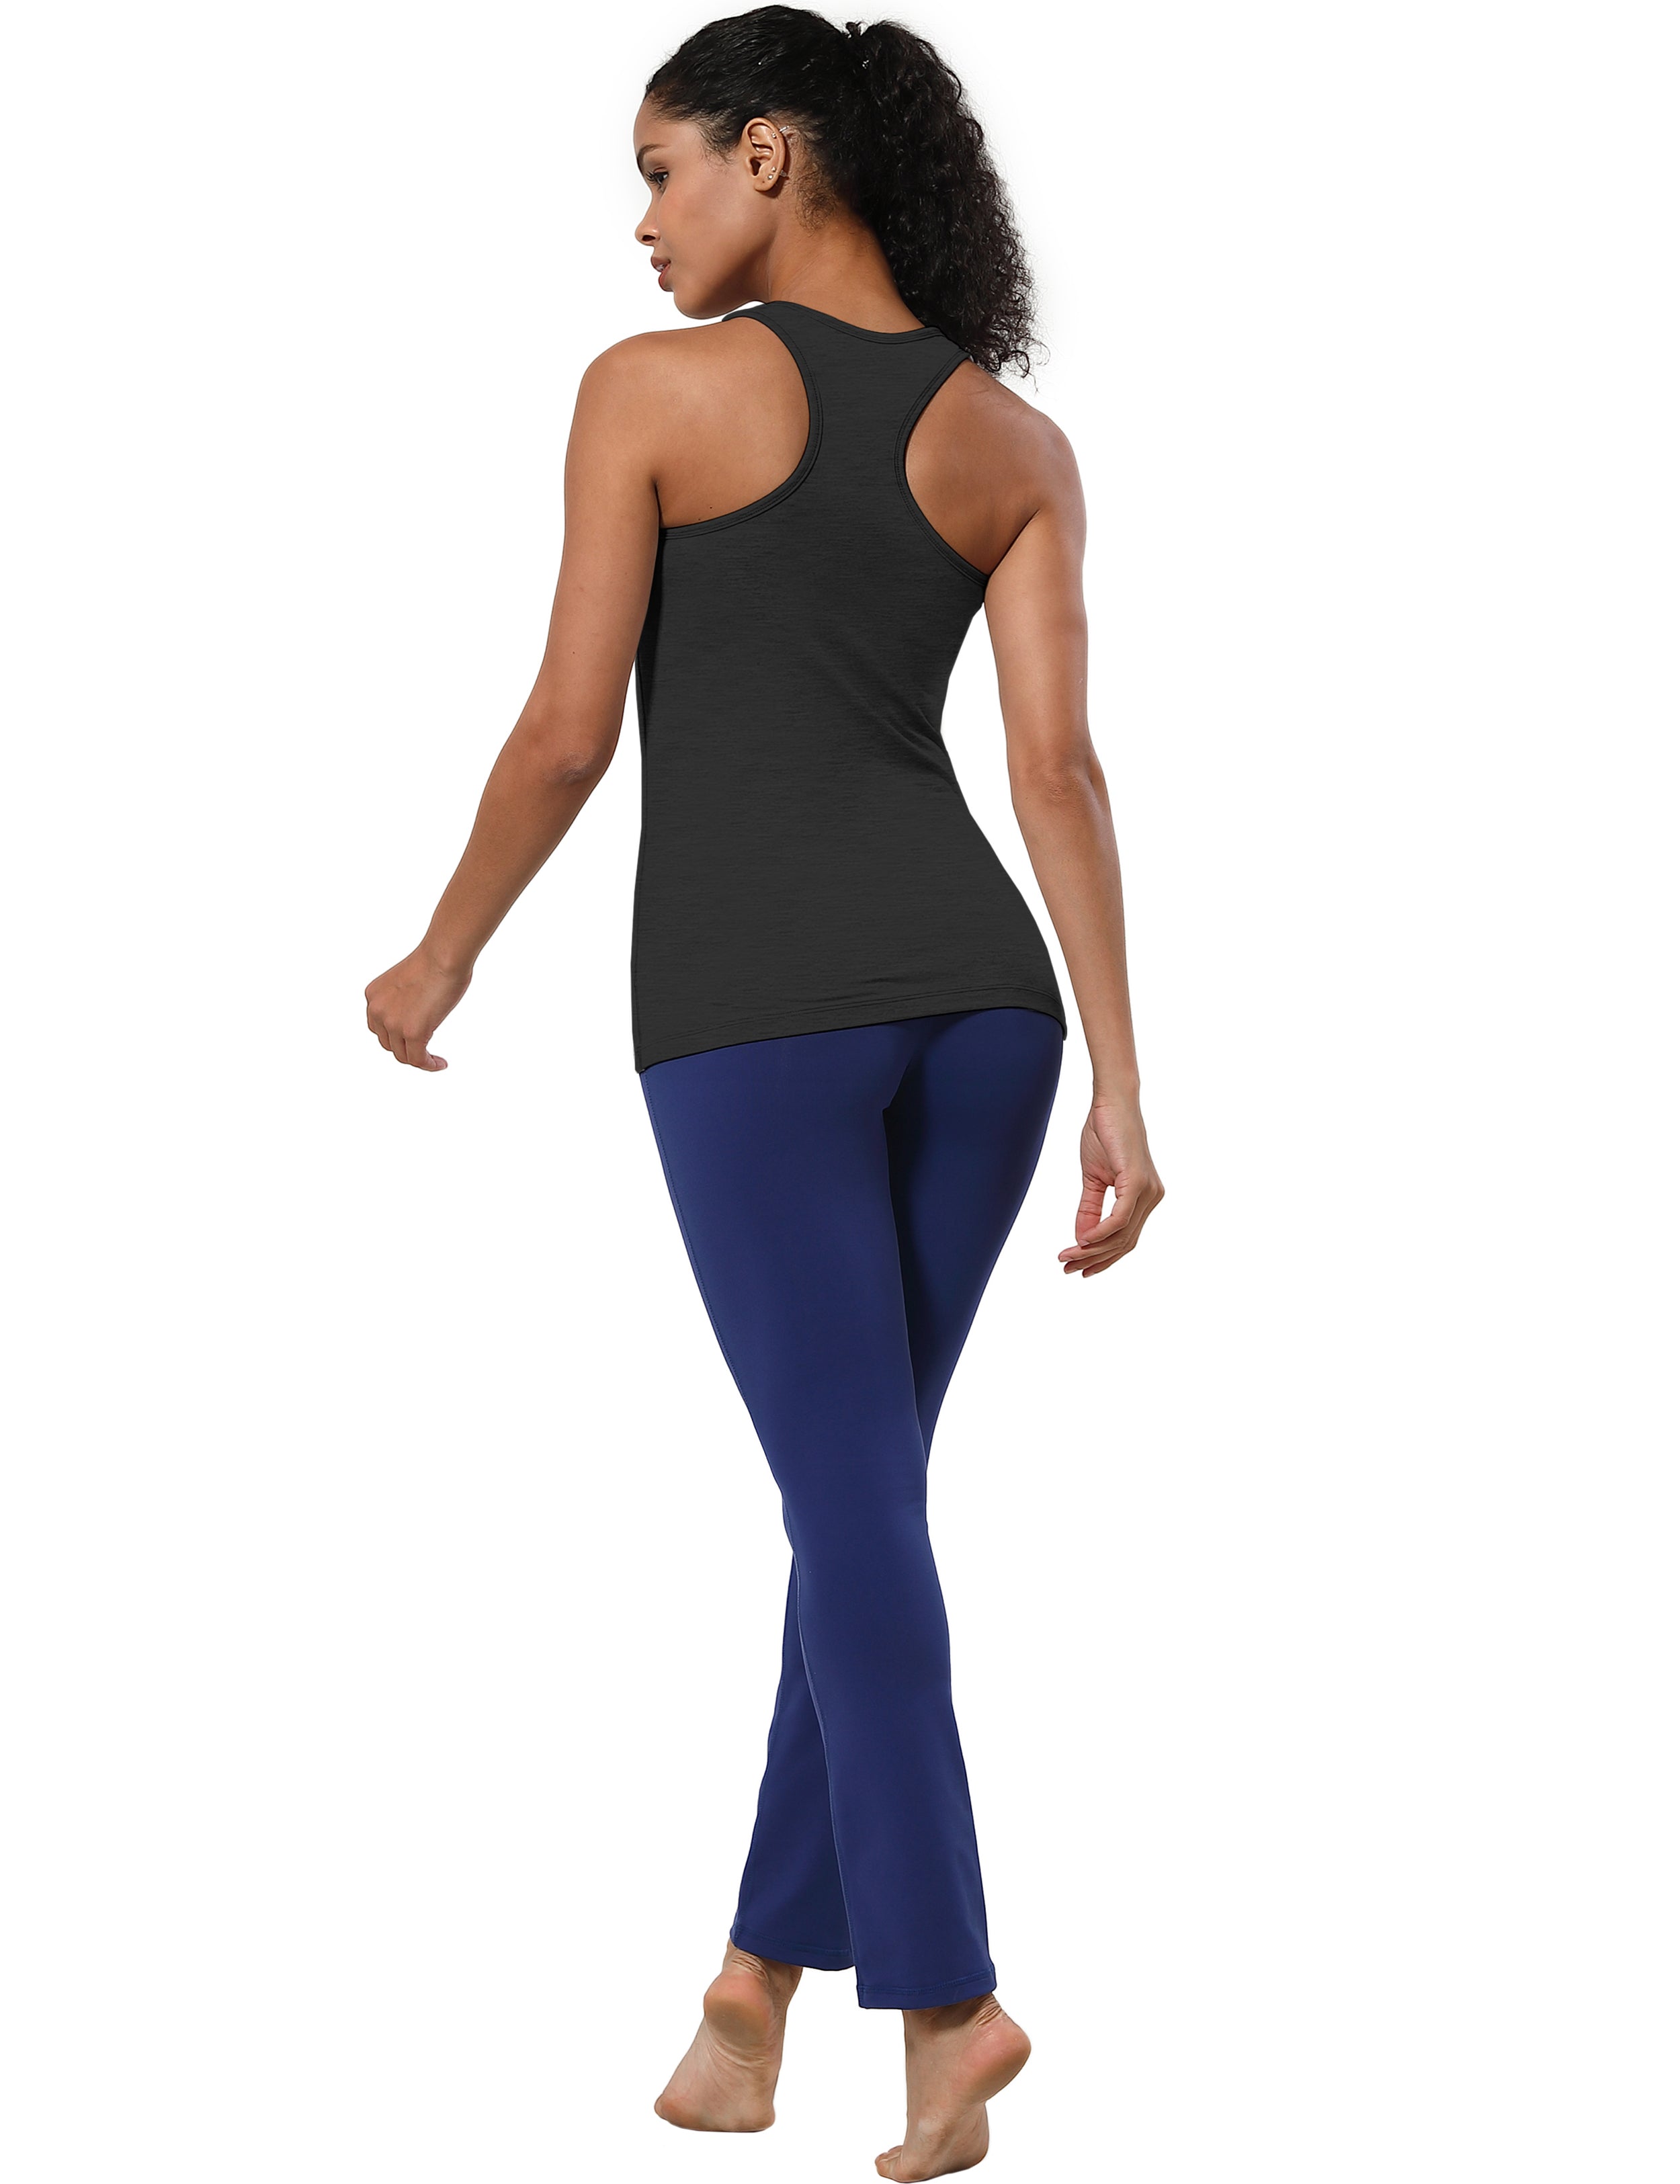 Racerback Athletic Tank Tops heathercharcoal 92%Nylon/8%Spandex(Cotton Soft) Designed for Pilates Tight Fit So buttery soft, it feels weightless Sweat-wicking Four-way stretch Breathable Contours your body Sits below the waistband for moderate, everyday coverage